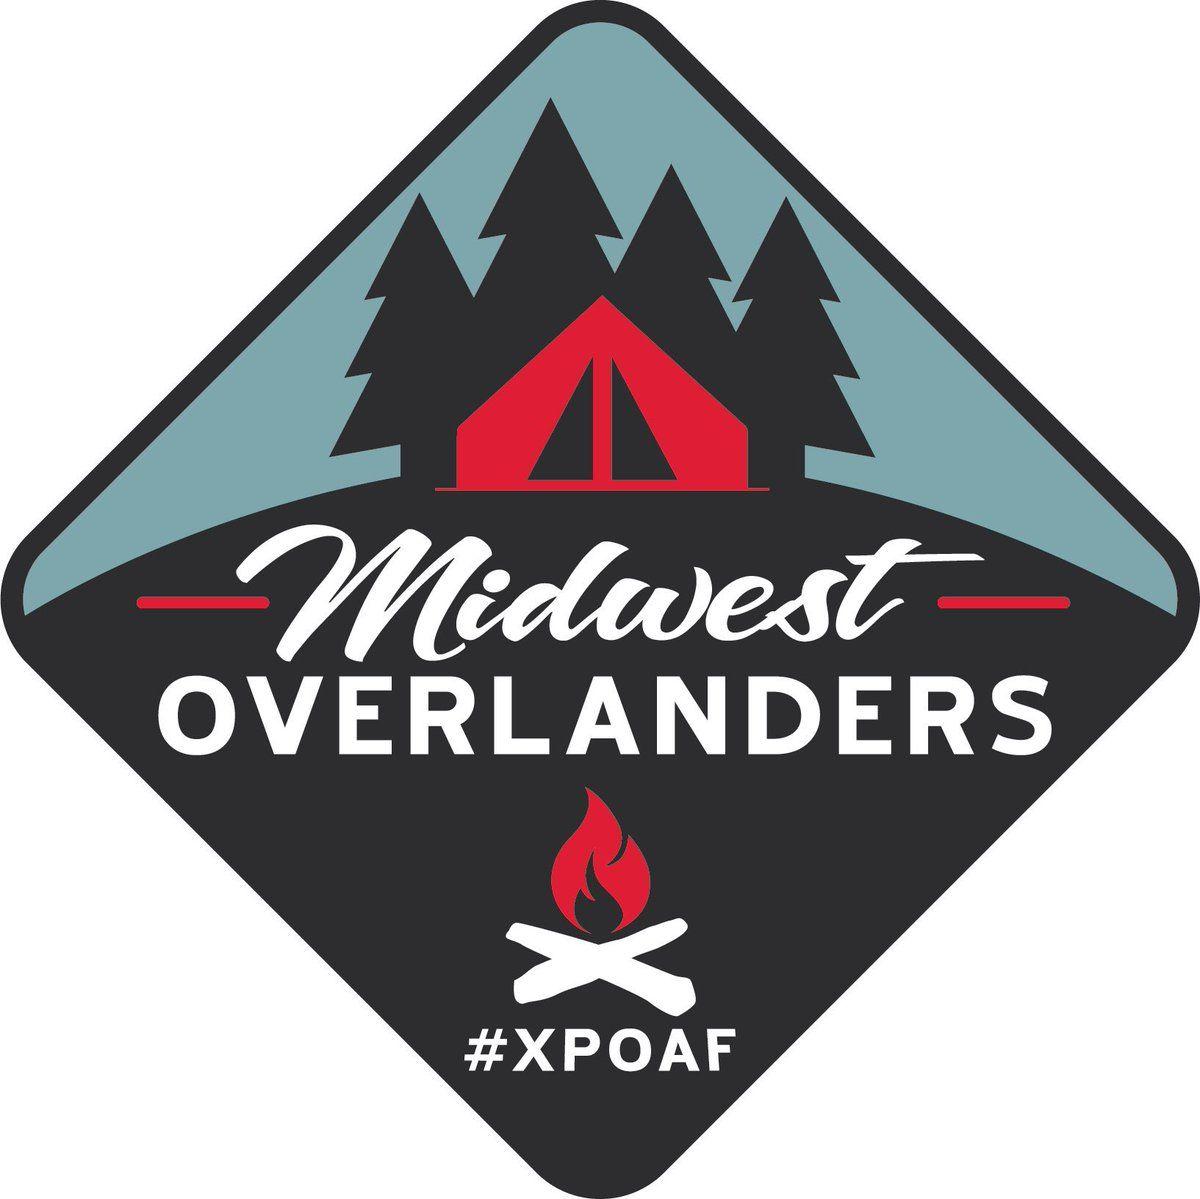 Overland Logo - Midwest Overlanders logo is here. Stickers have